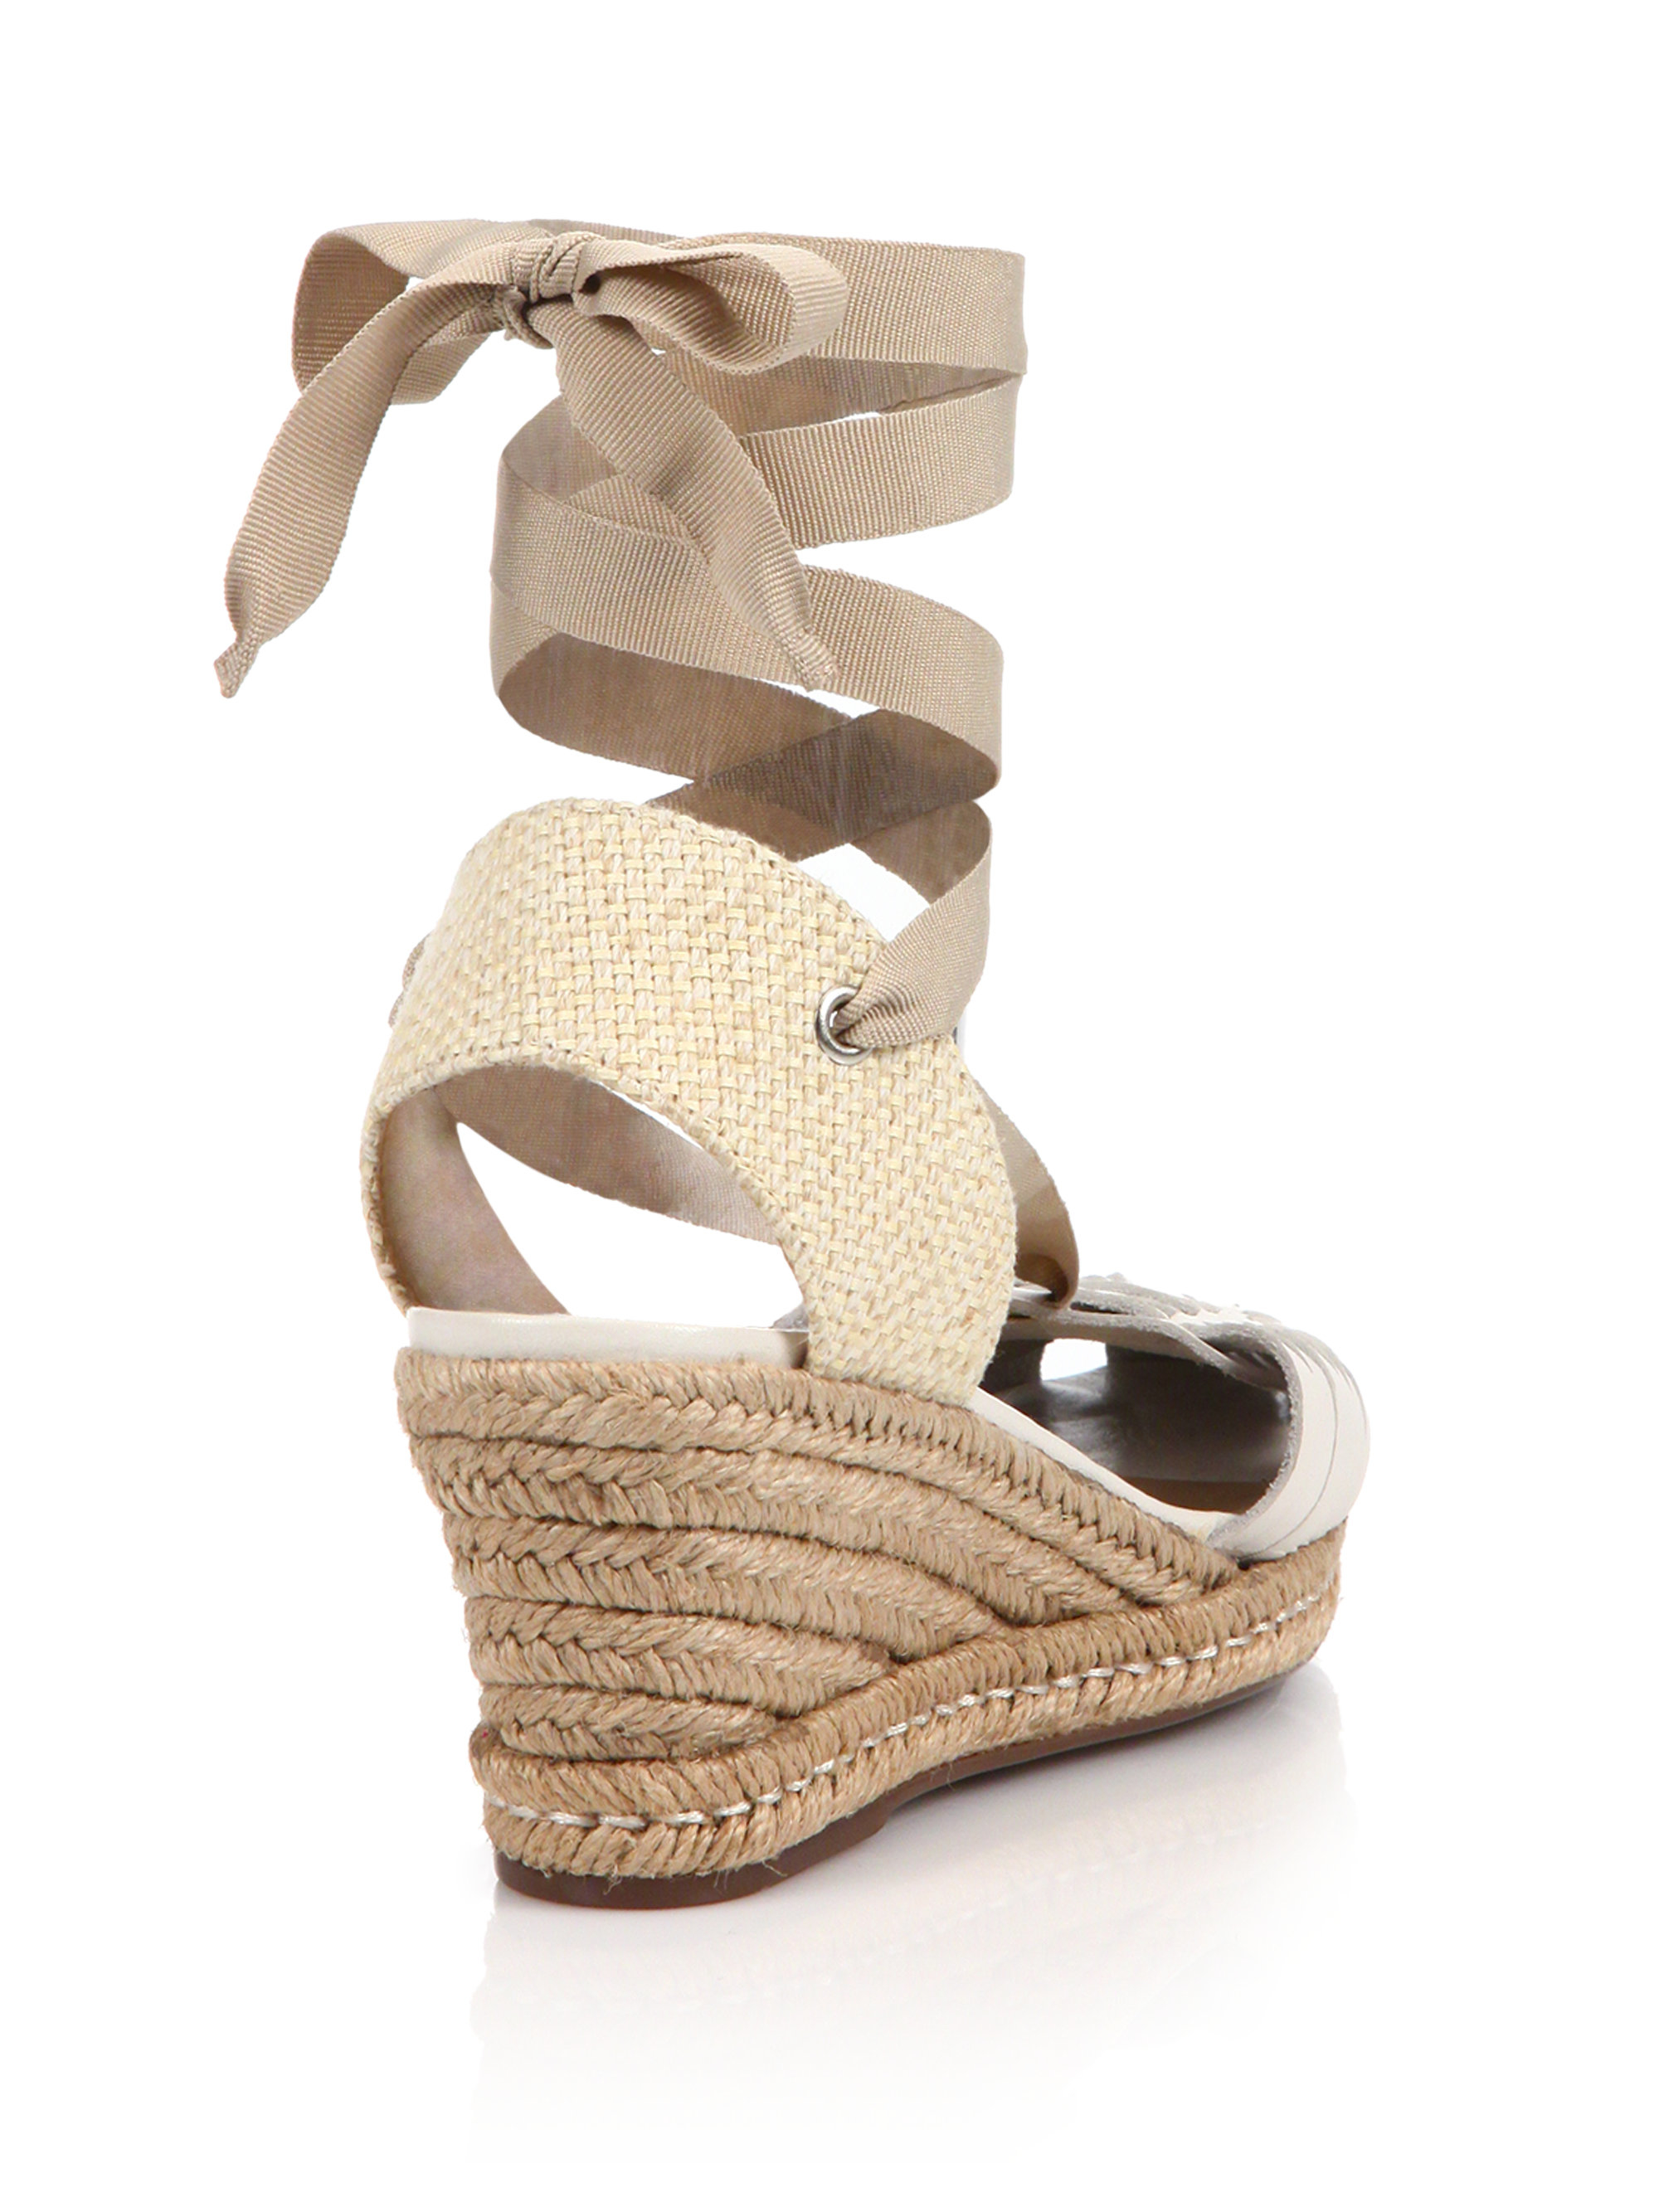 Schutz Espadrille Wedge Top Sellers, UP TO 67% OFF | seo.org